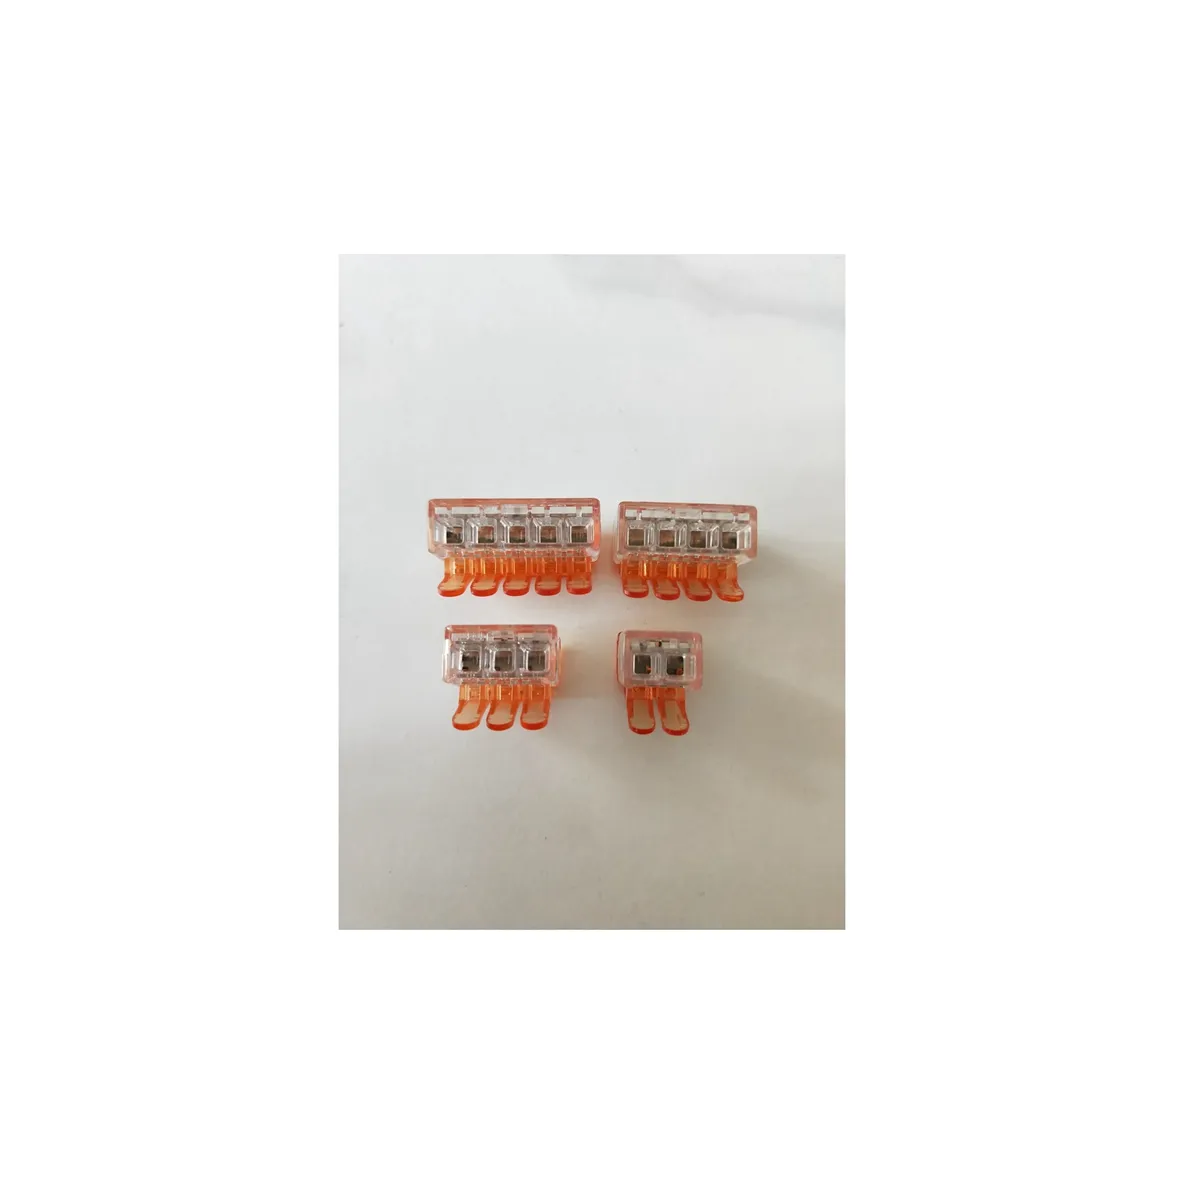 Sell well new type universal compact terminal releasable wire connector for all types of wire